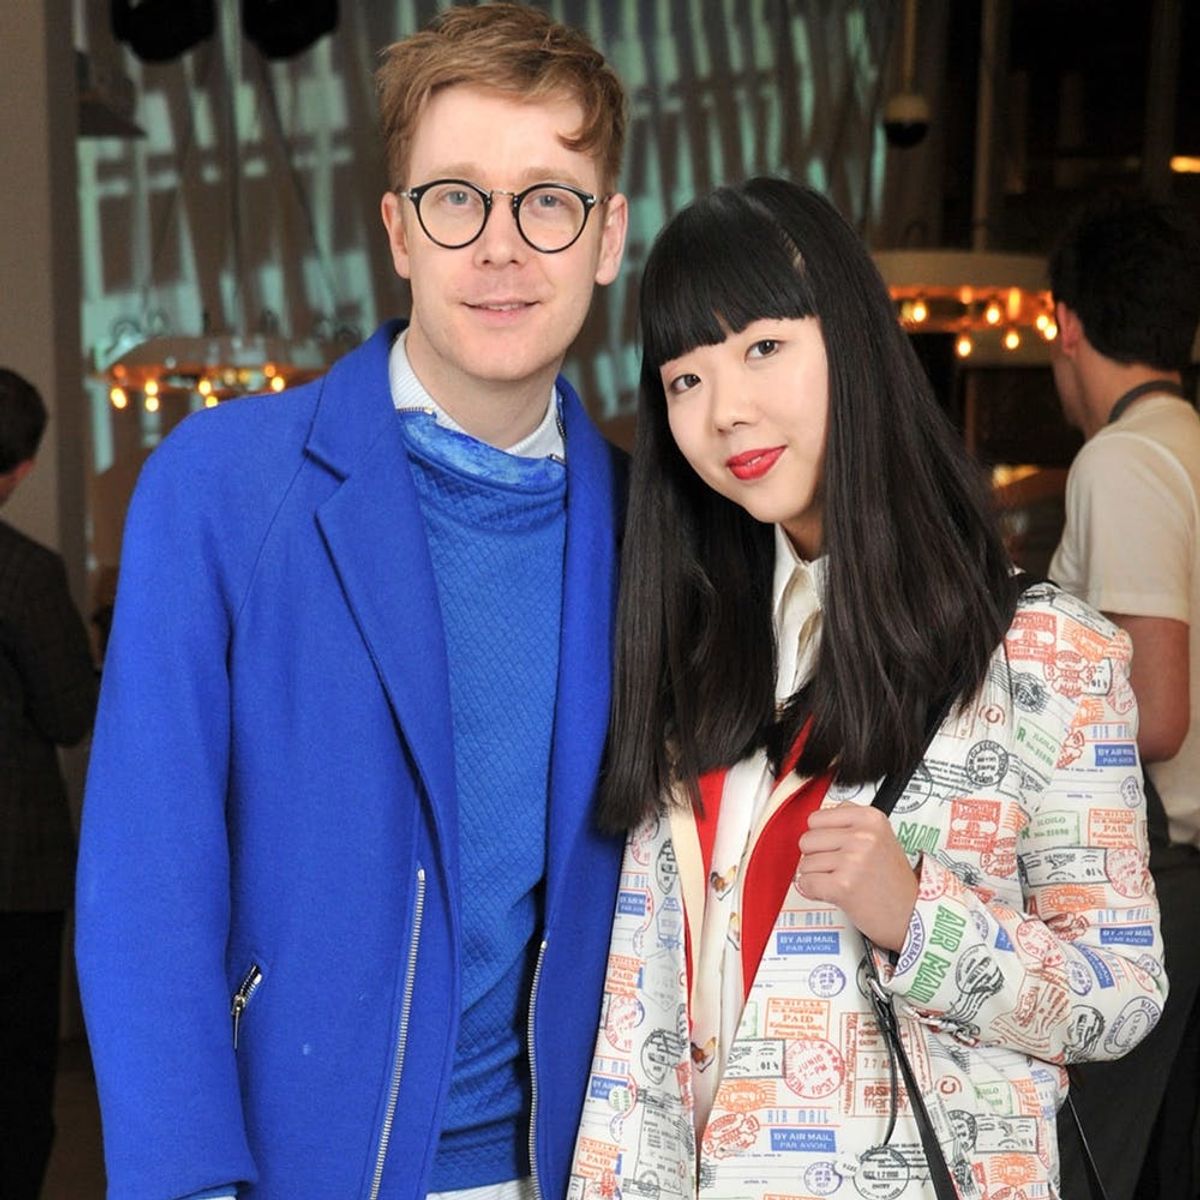 A Famous Fashion Blogger’s Boyfriend Has Gone Mysteriously Missing